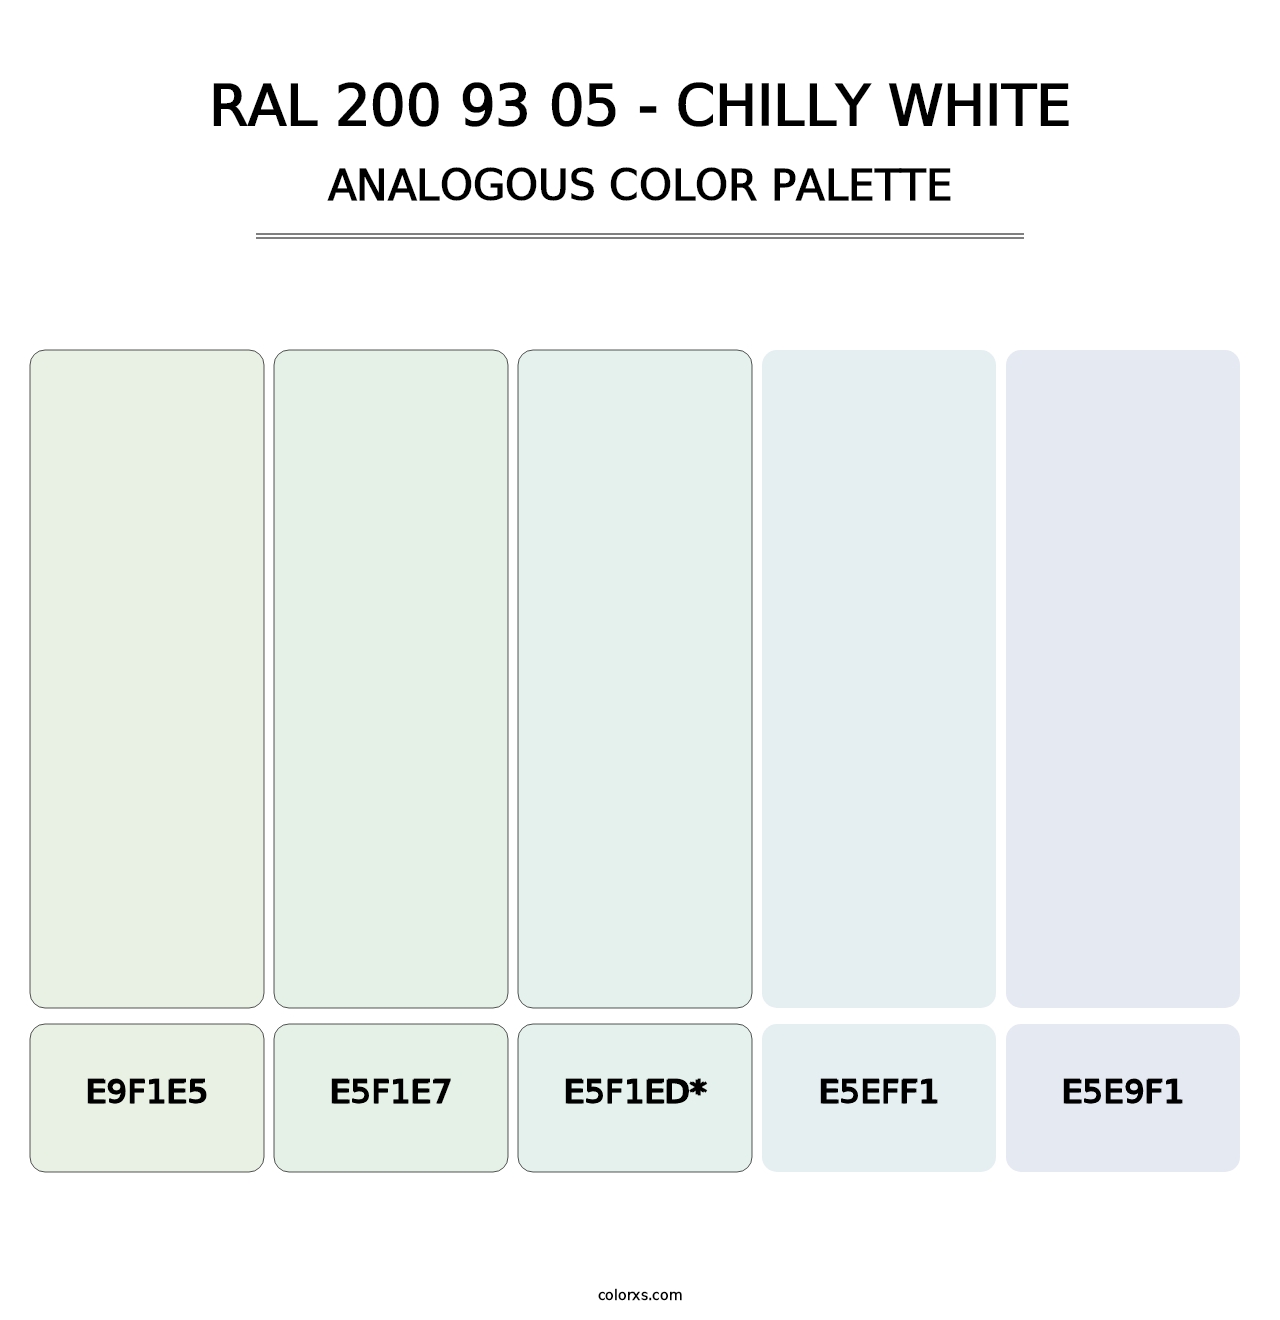 RAL 200 93 05 - Chilly White - Analogous Color Palette